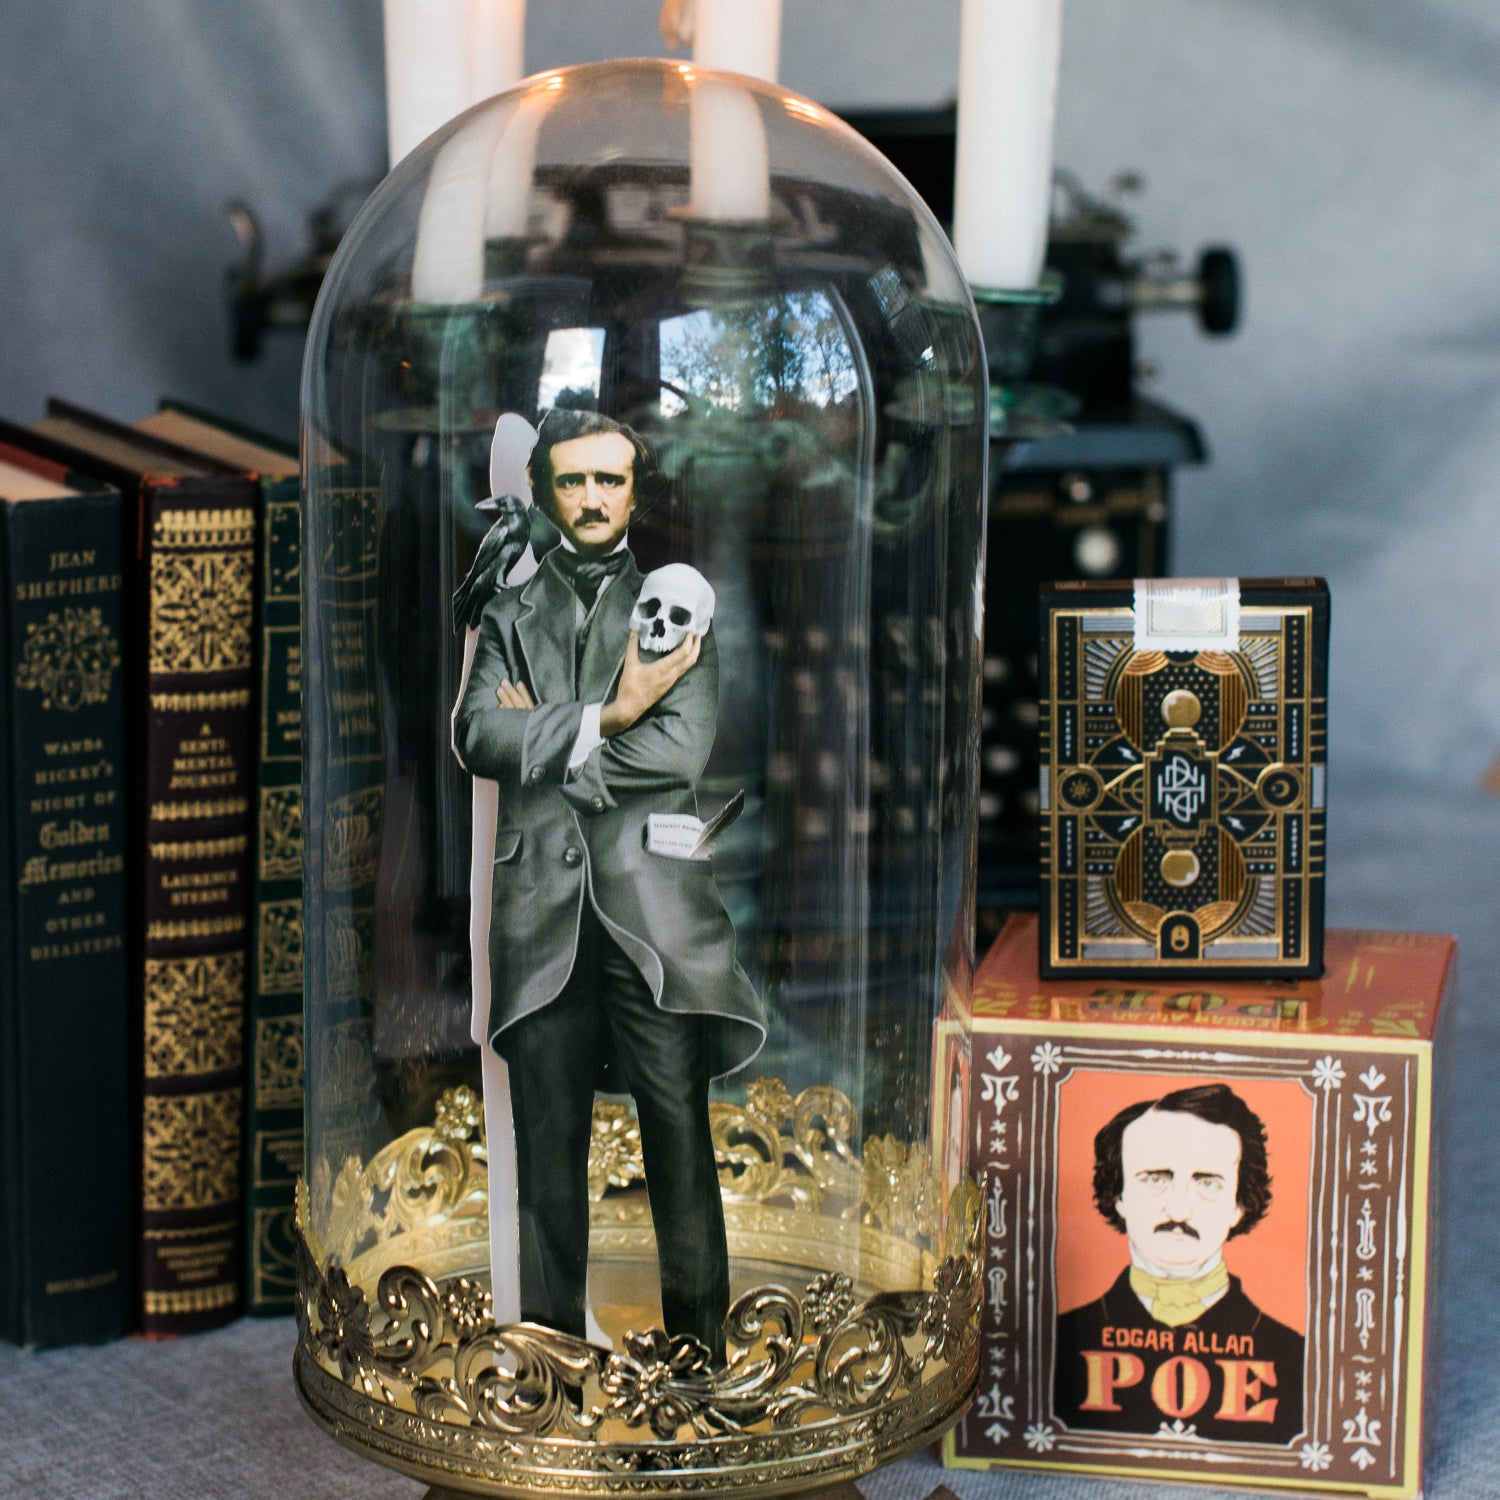 Edgar Allan Poe Nevermore Gift Box Unique Gift For Book Lover My Weekend is Booked